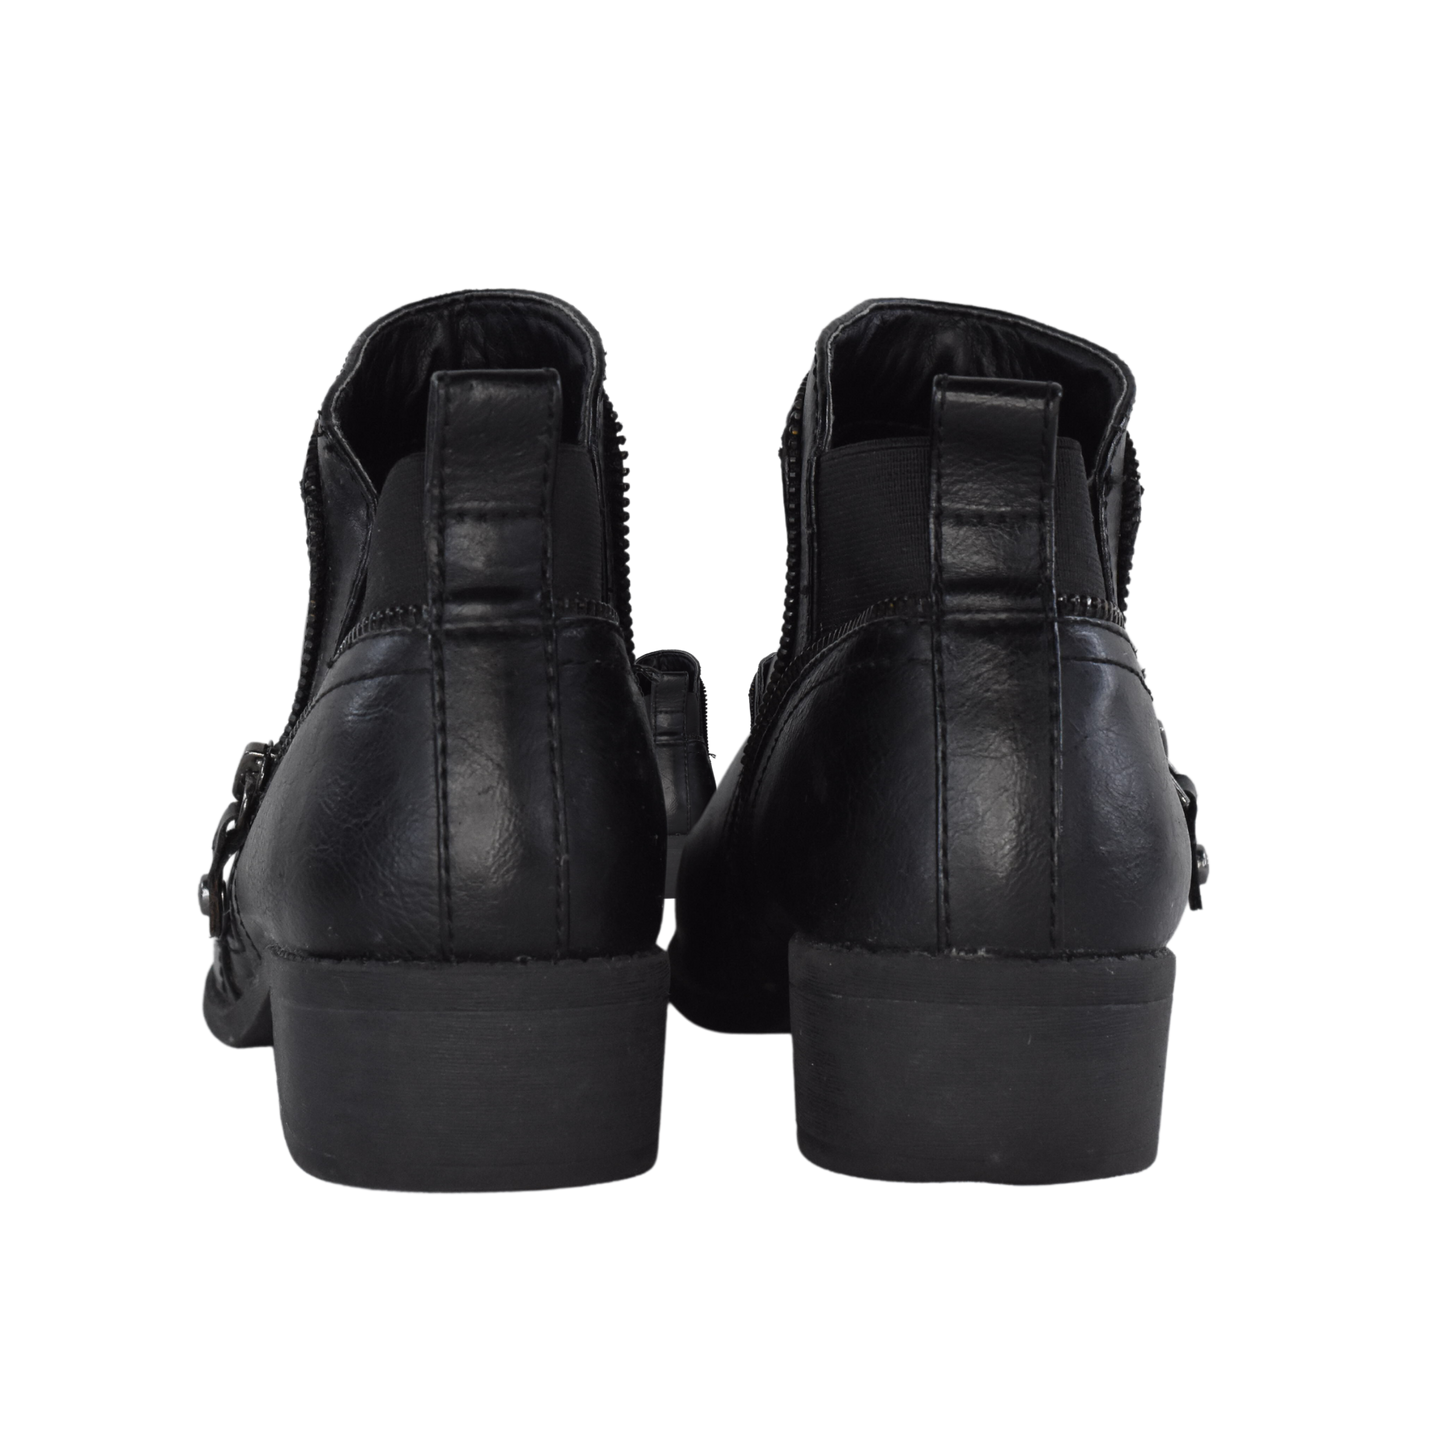 Guess Bootie Black Size 7.5M SKU 000091-4